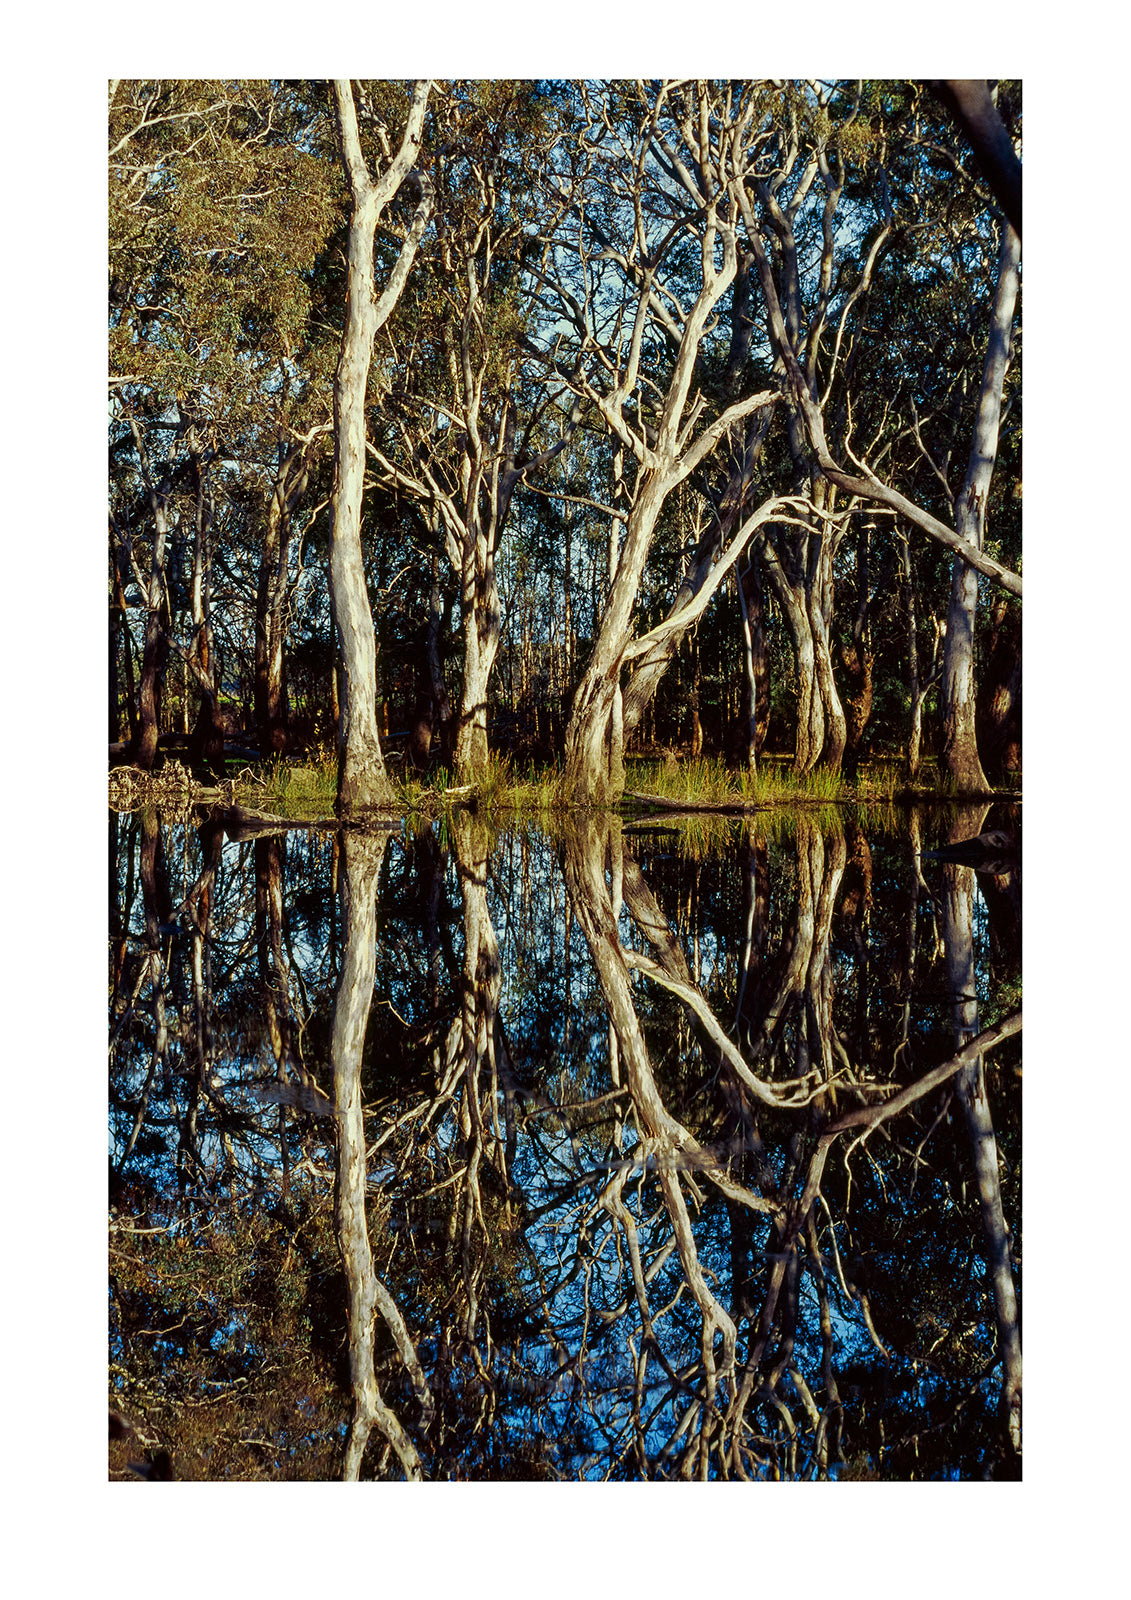 Rough-barked manna and blue-gum trees reflected in a wetland at dawn. Ropers Wetland, Cygnet River Valley, Kangaroo Island, South Australia.